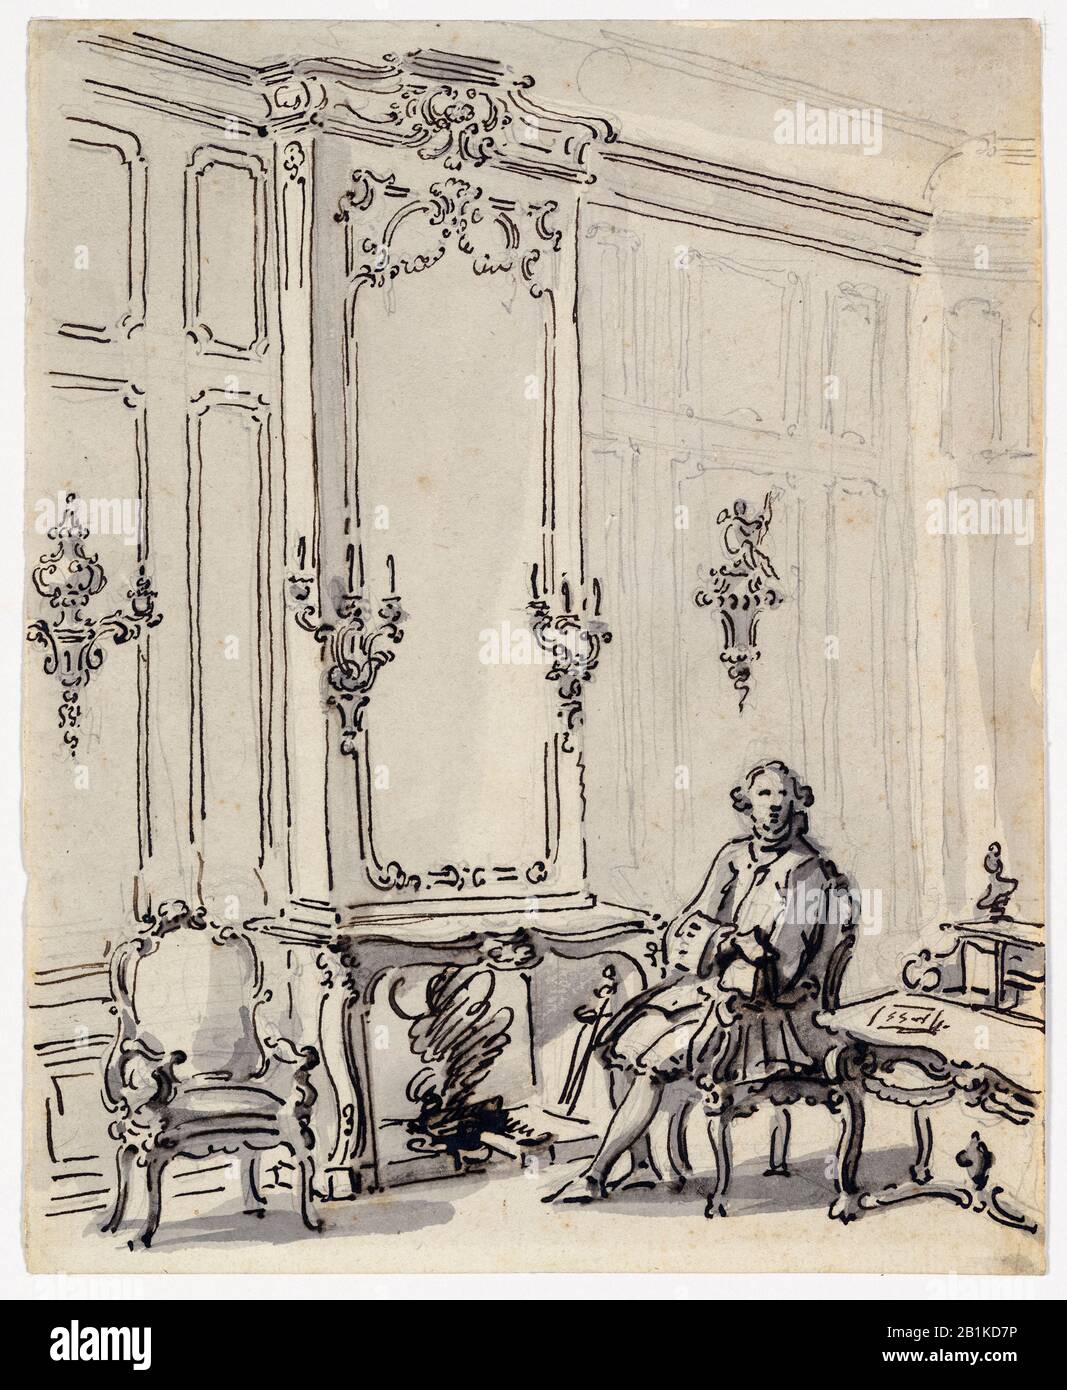 Canaletto, A Venetian Interior with a Young Man Seated by the Fire, drawing, after 1717 Stock Photo